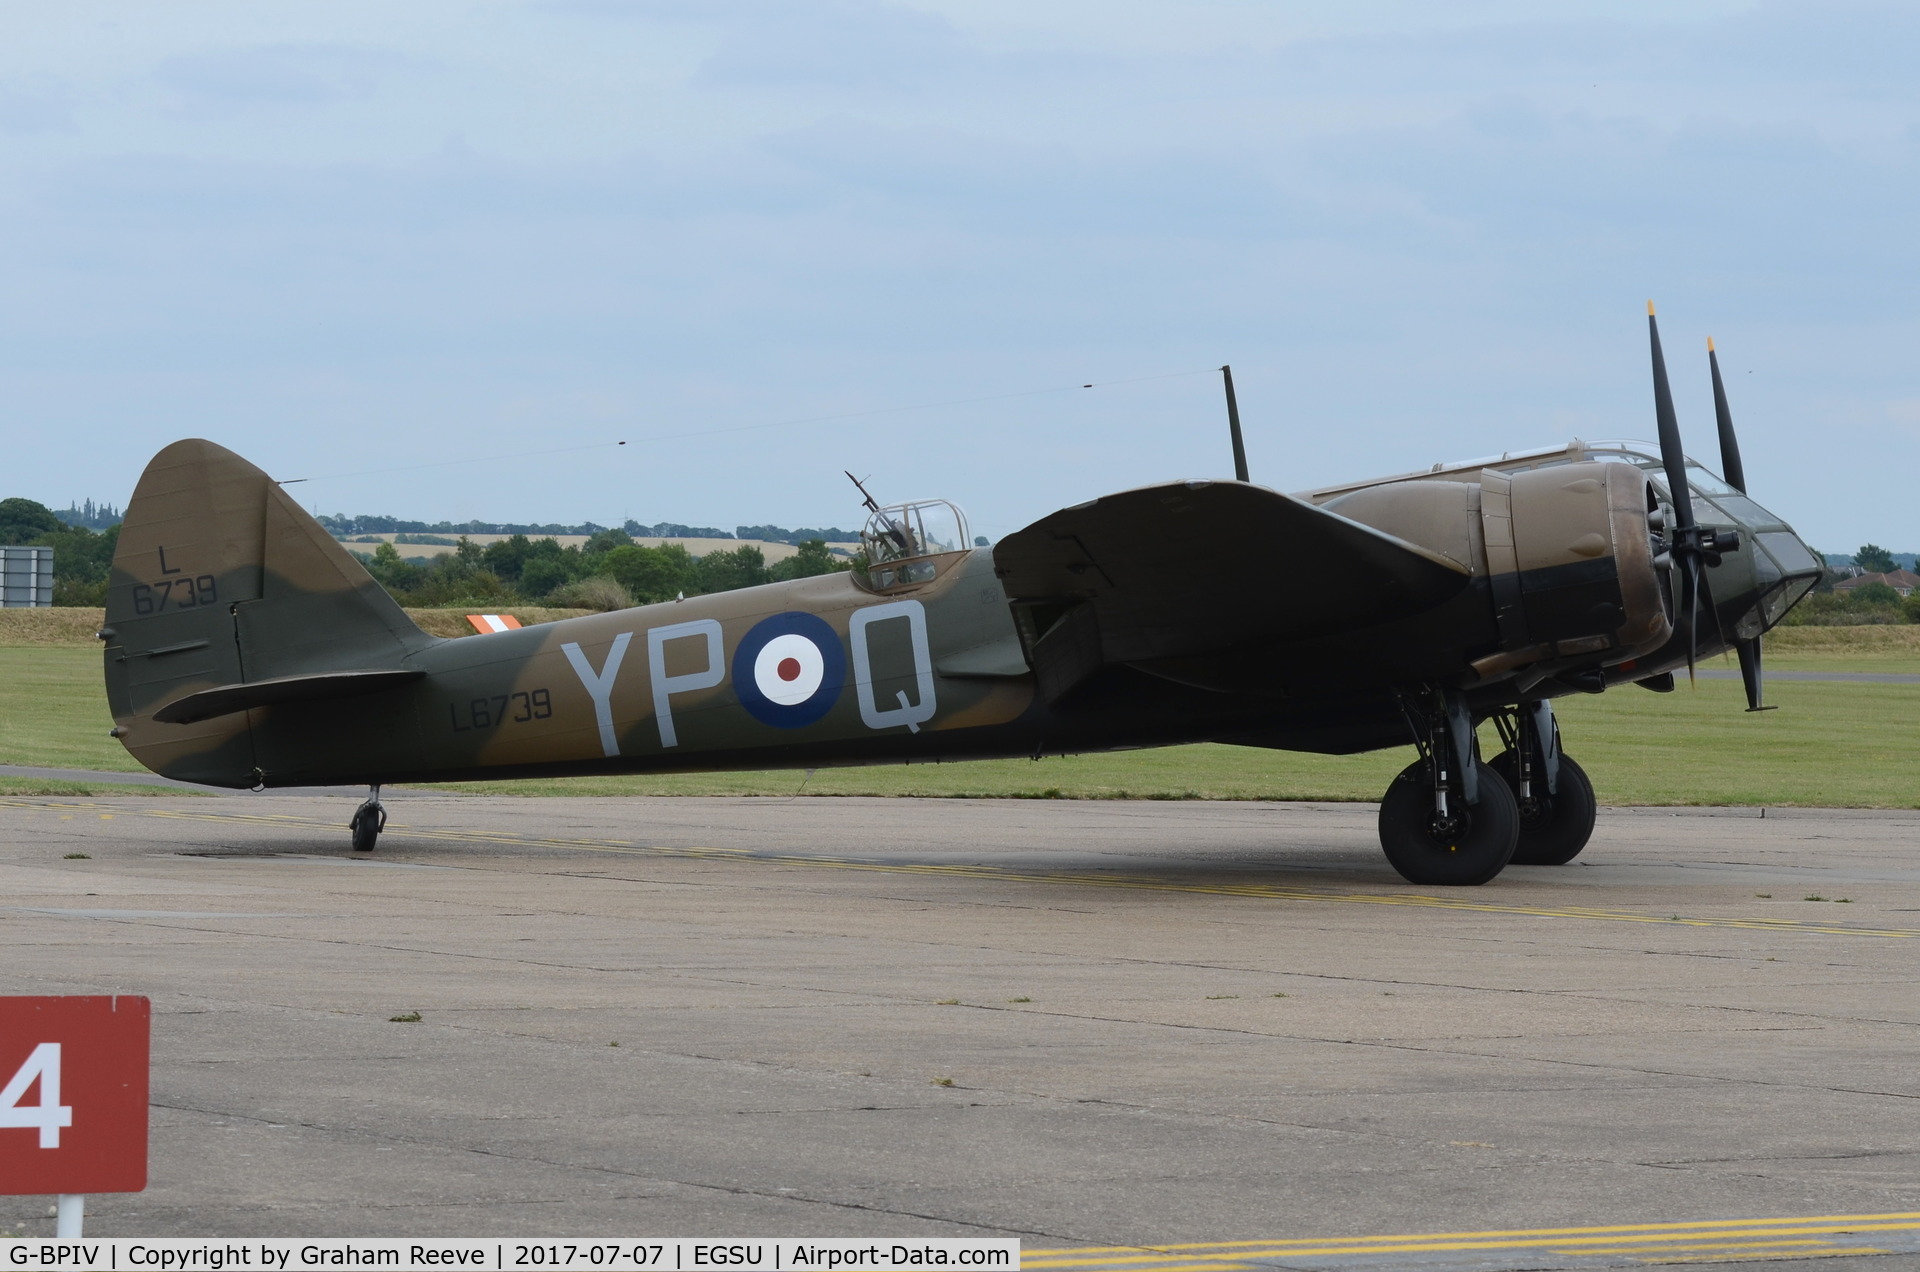 G-BPIV, 1943 Bristol 149 Bolingbroke Mk.IVT C/N 10201, About to depart from Duxford.